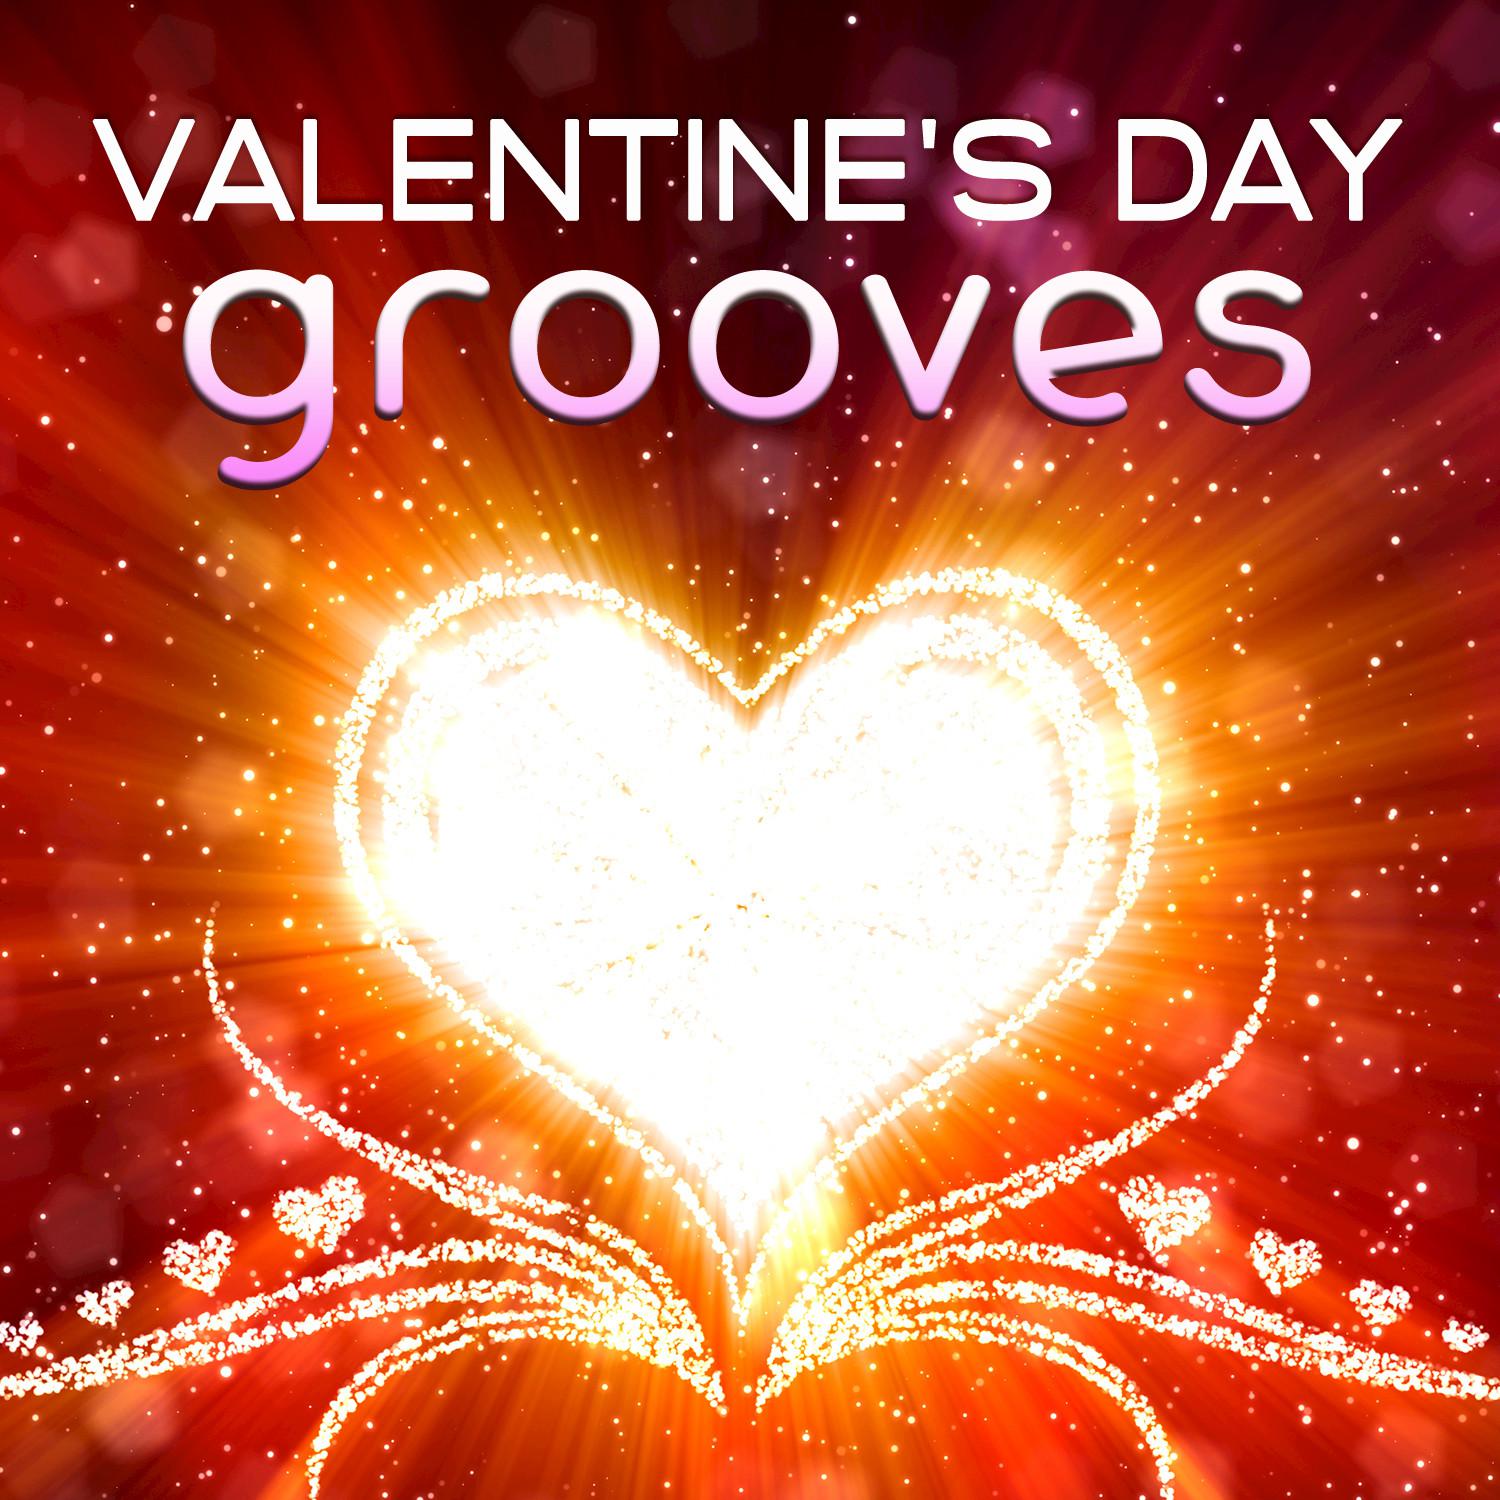 Valentine's Day Grooves